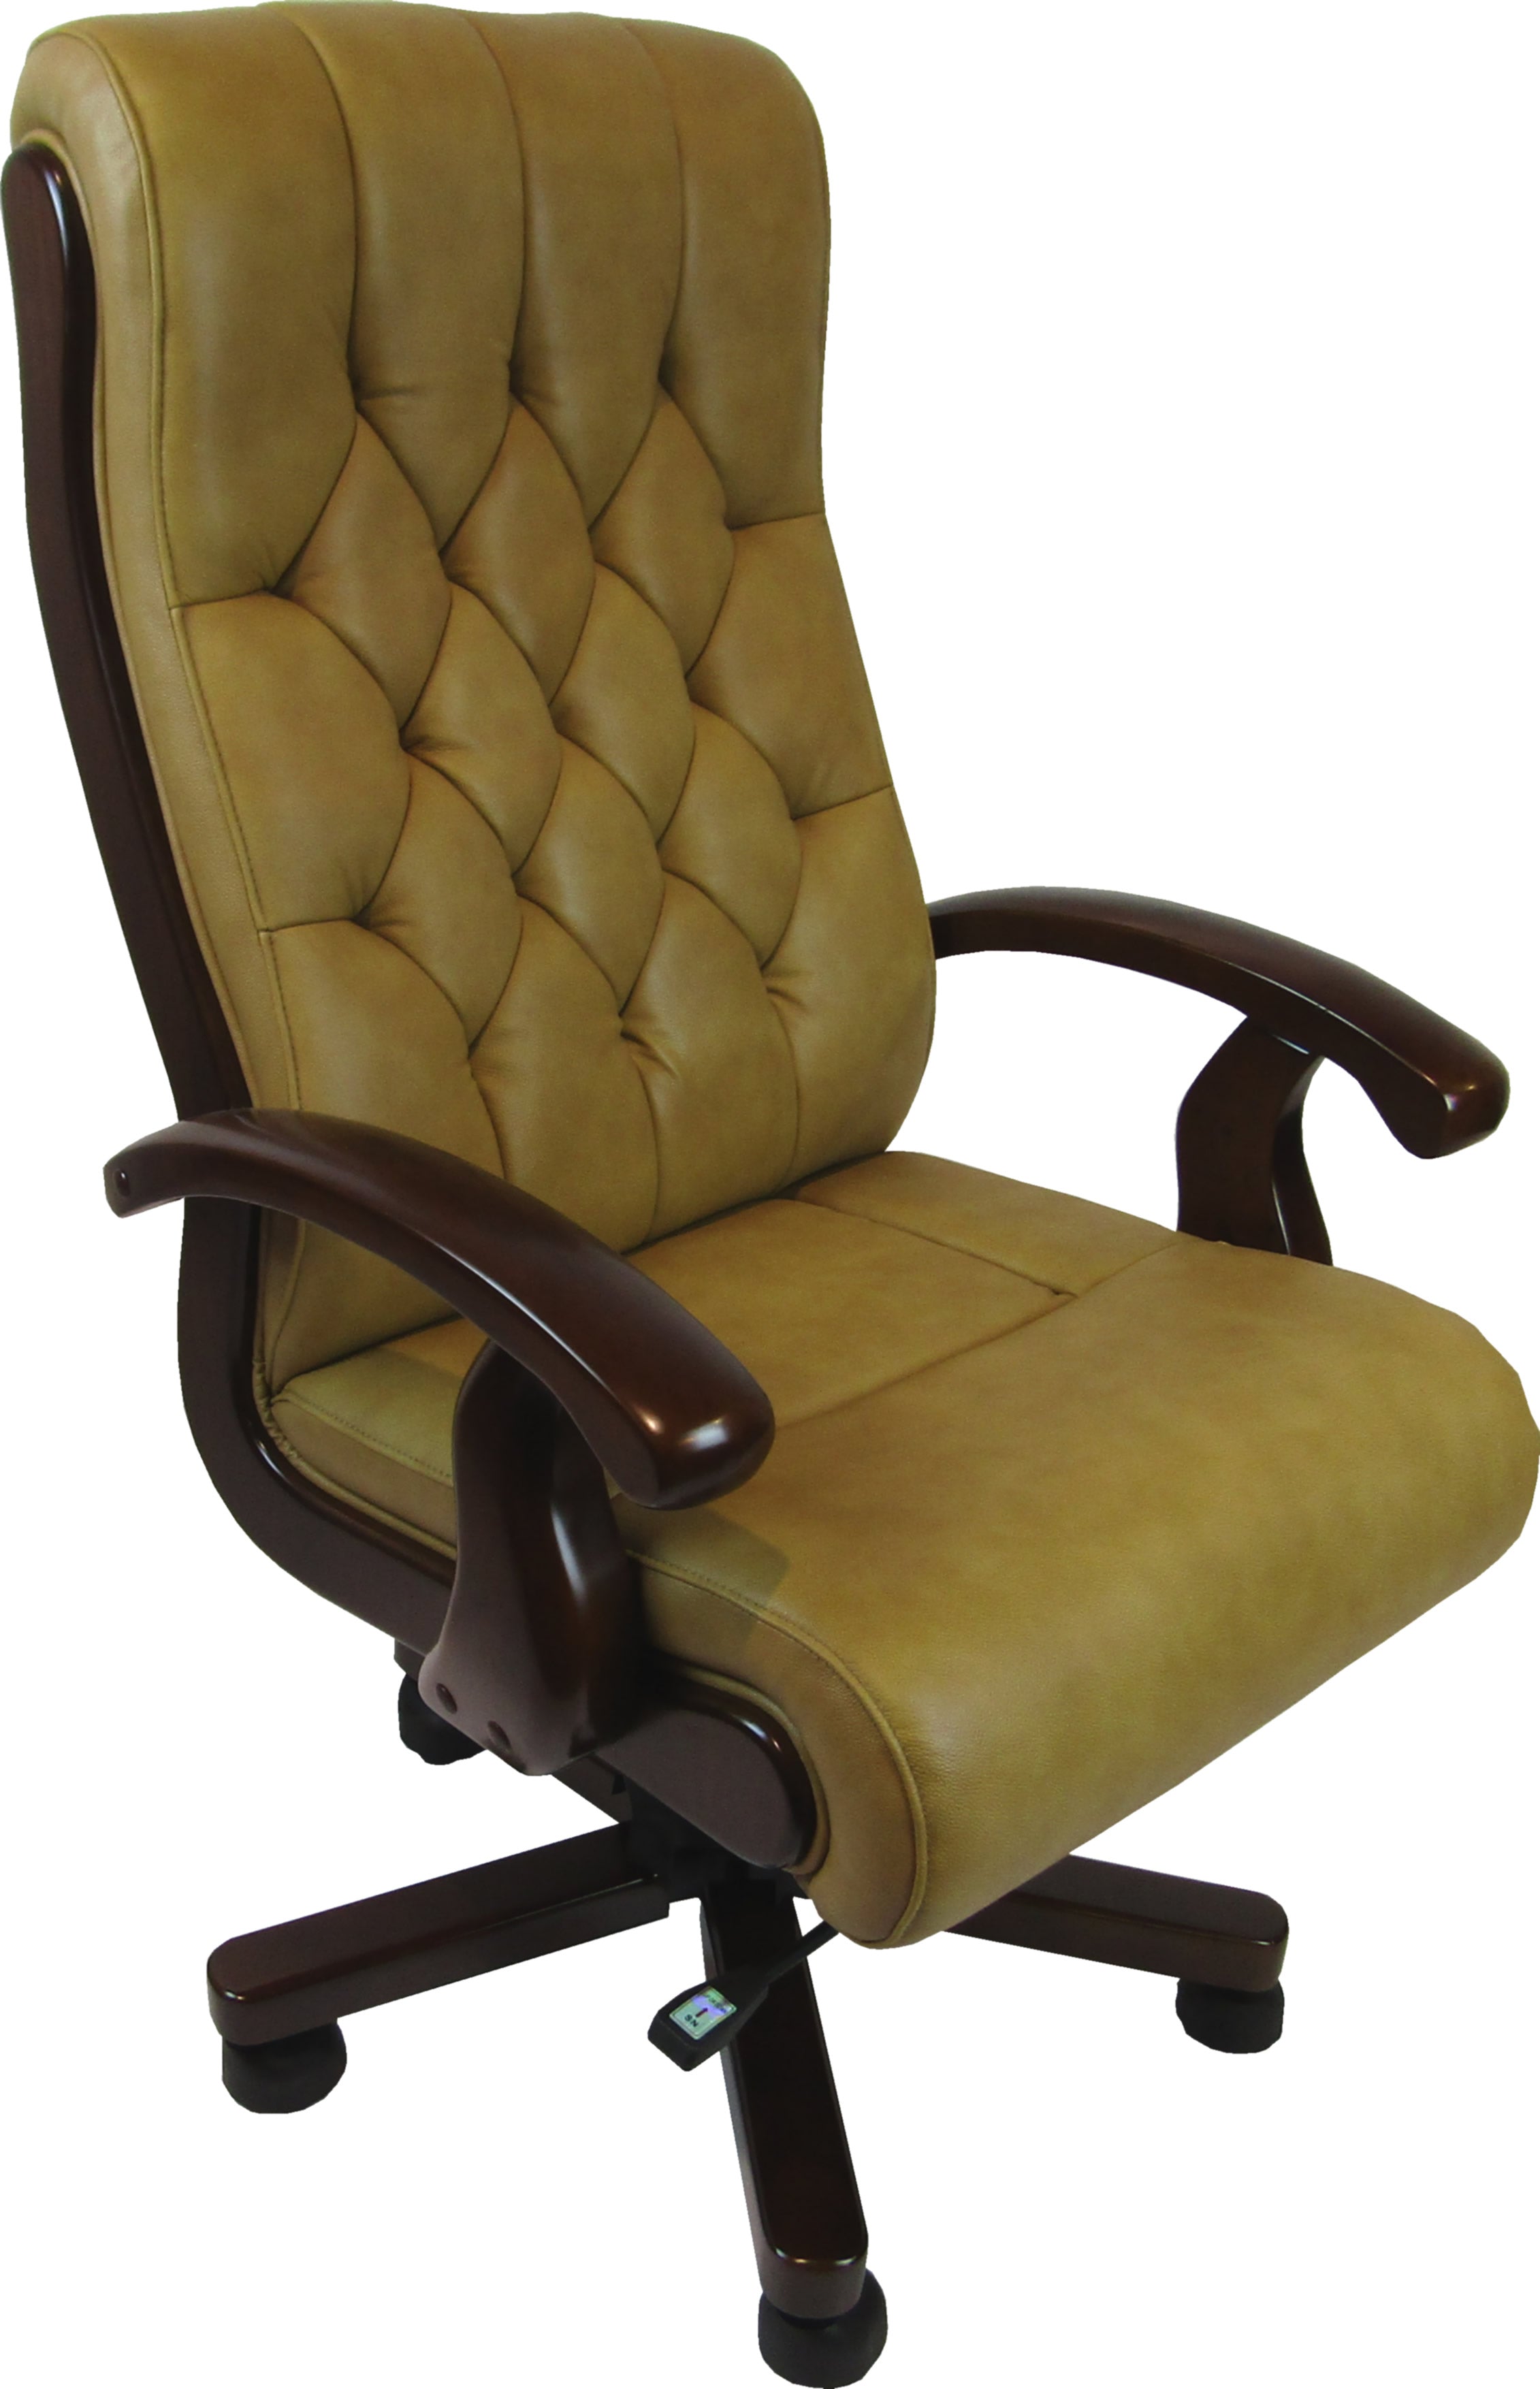 Beige Leather Chesterfield Executive Office Chair - CHA-WS-917 UK